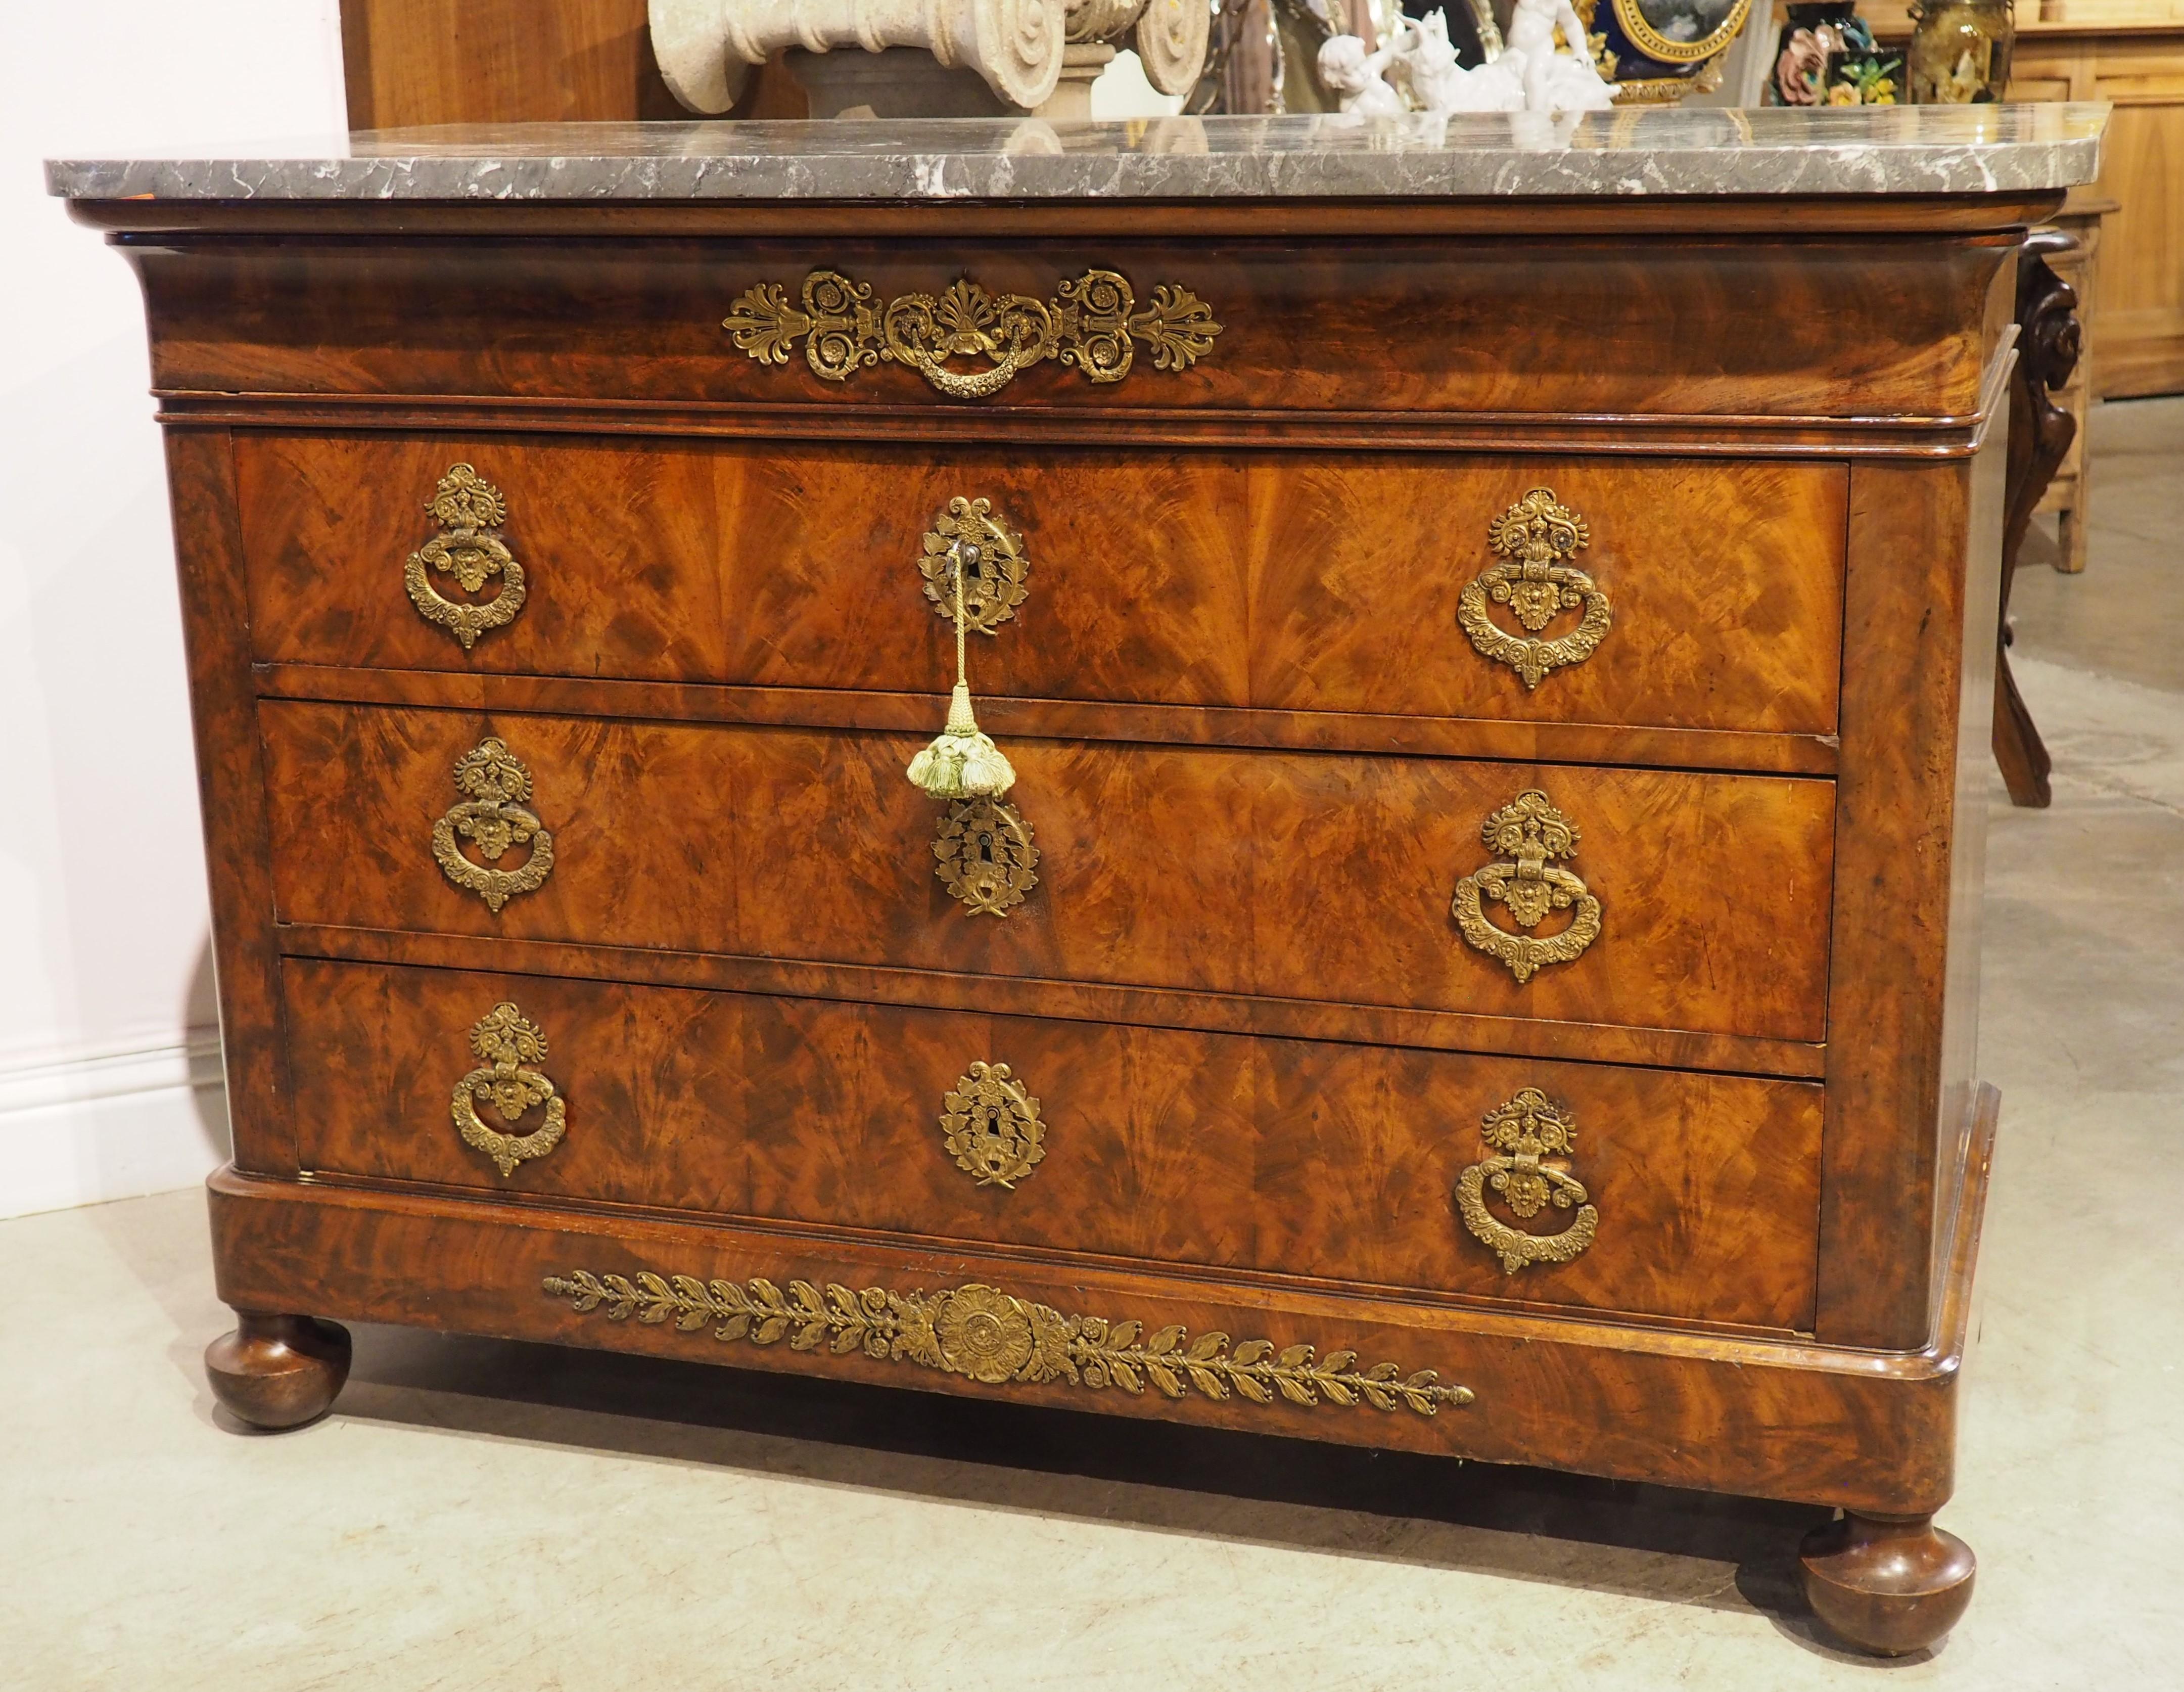 Circa 1820 French Restauration Commode in Flame Mahogany, Gilt Bronze Hardware For Sale 14